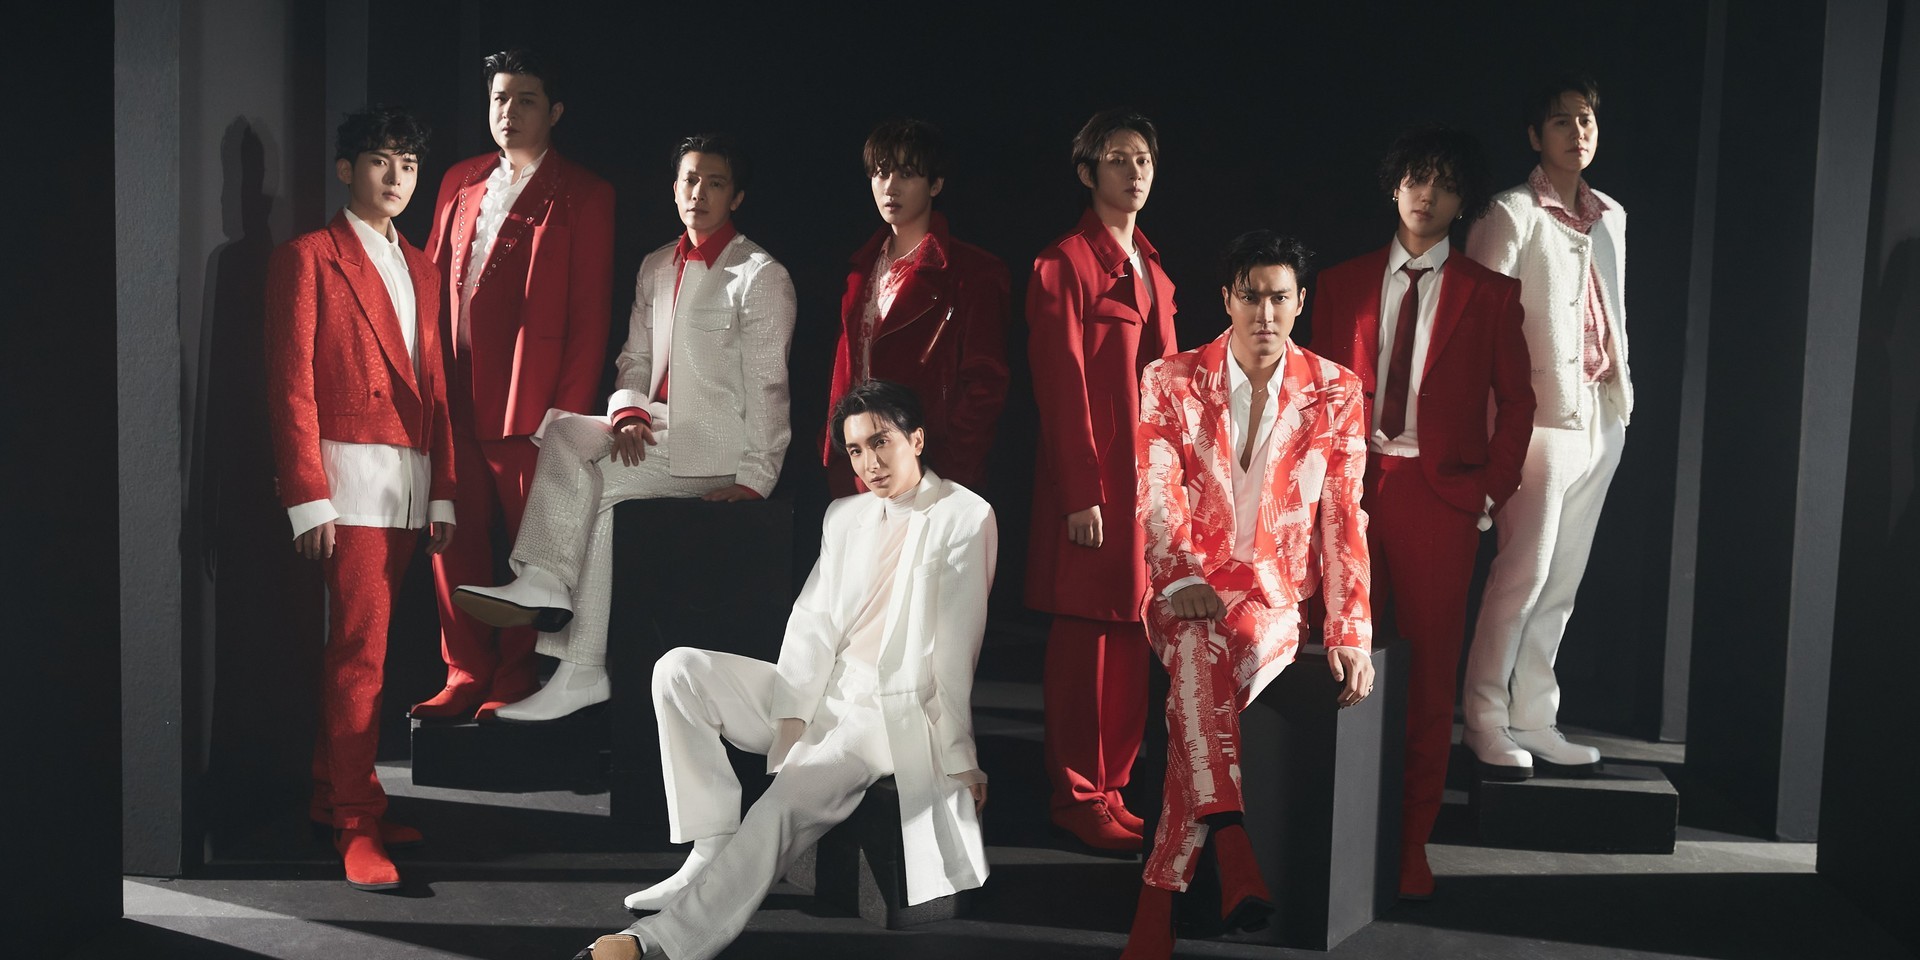 PULP Live World and Label SJ share: "It will be difficult to properly hold Super Junior's Manila concert as scheduled." Super Junior to meet Filipino ELFs at SM MOA Arena today